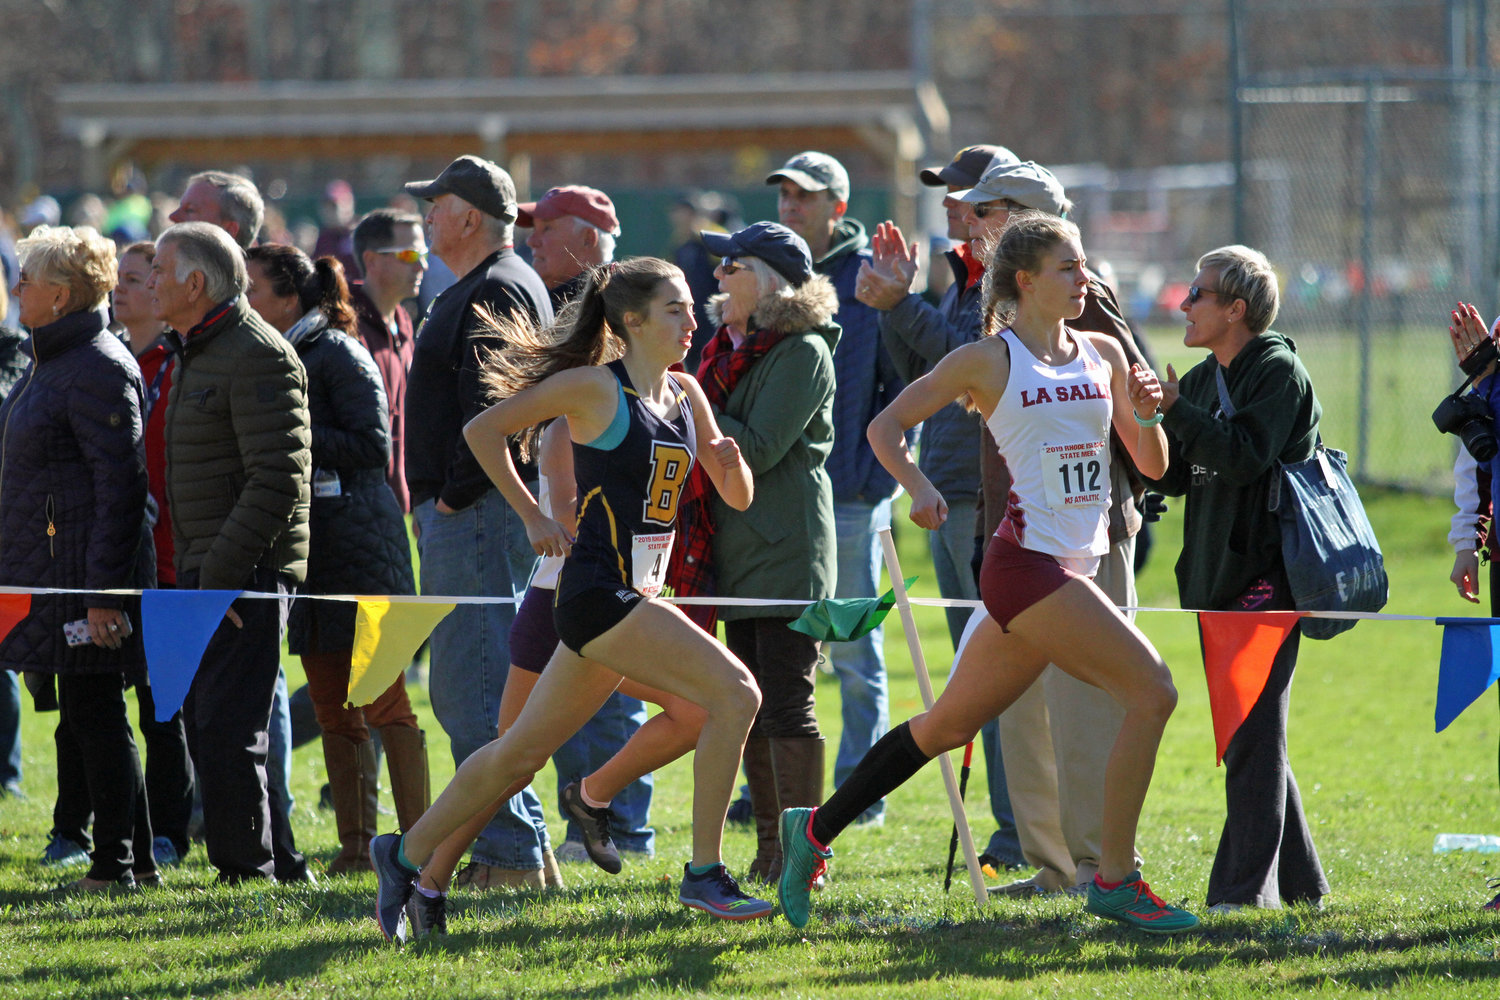 Barrington High School's Caroline Livingston runs a step behind LaSalle's Kayle Armitage during the state cross country meet on Saturday.